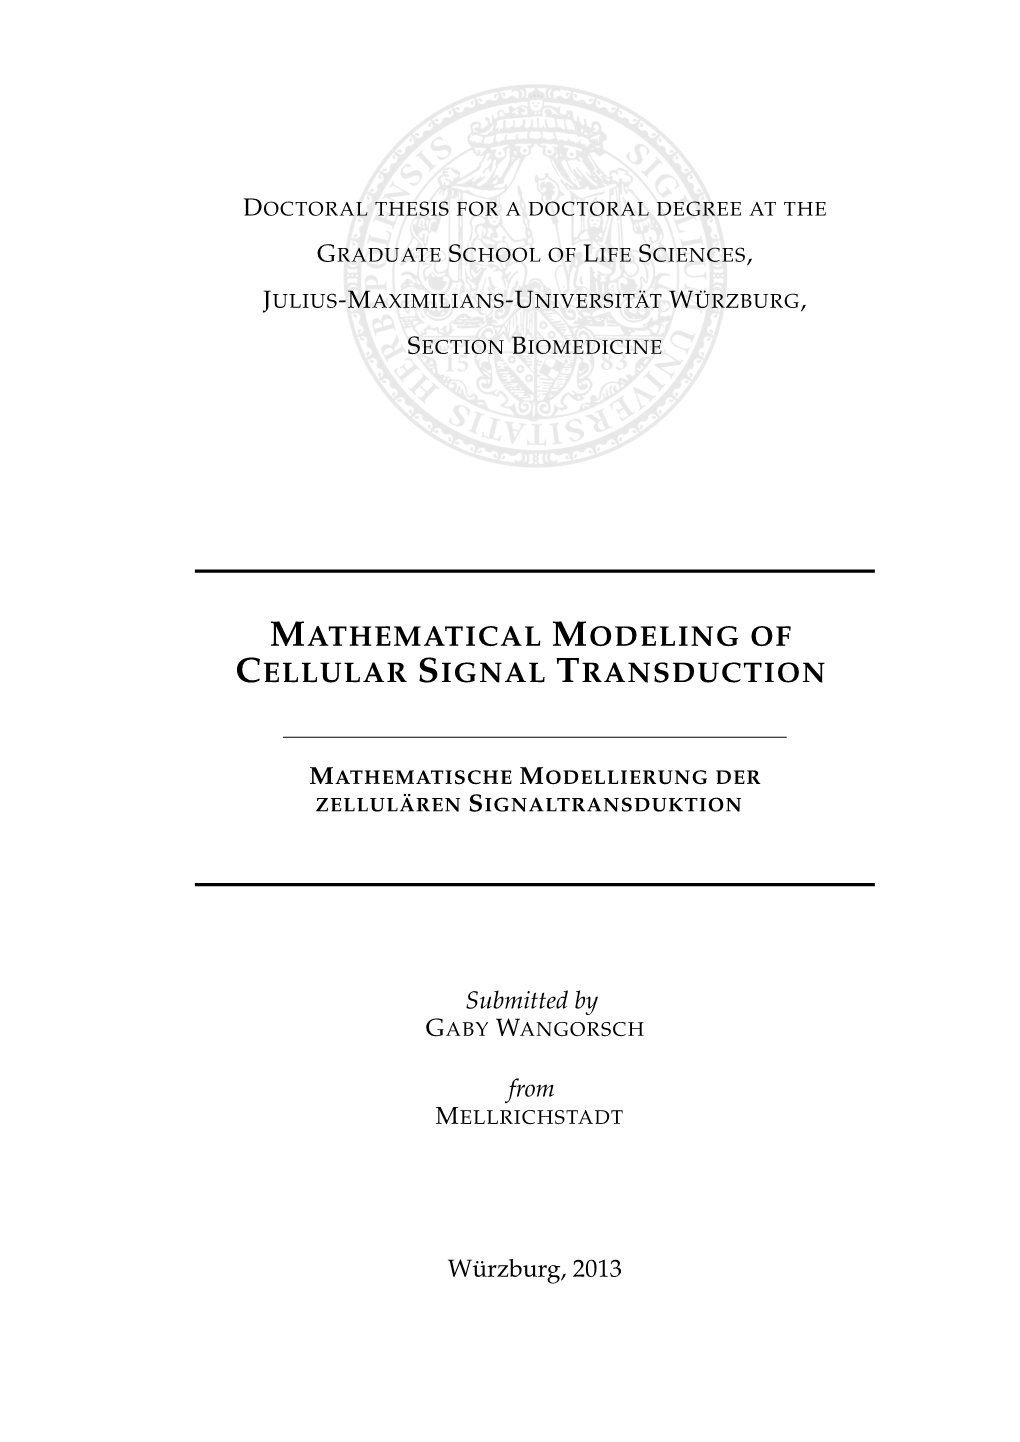 Mathematical Modeling of Cellular Signal